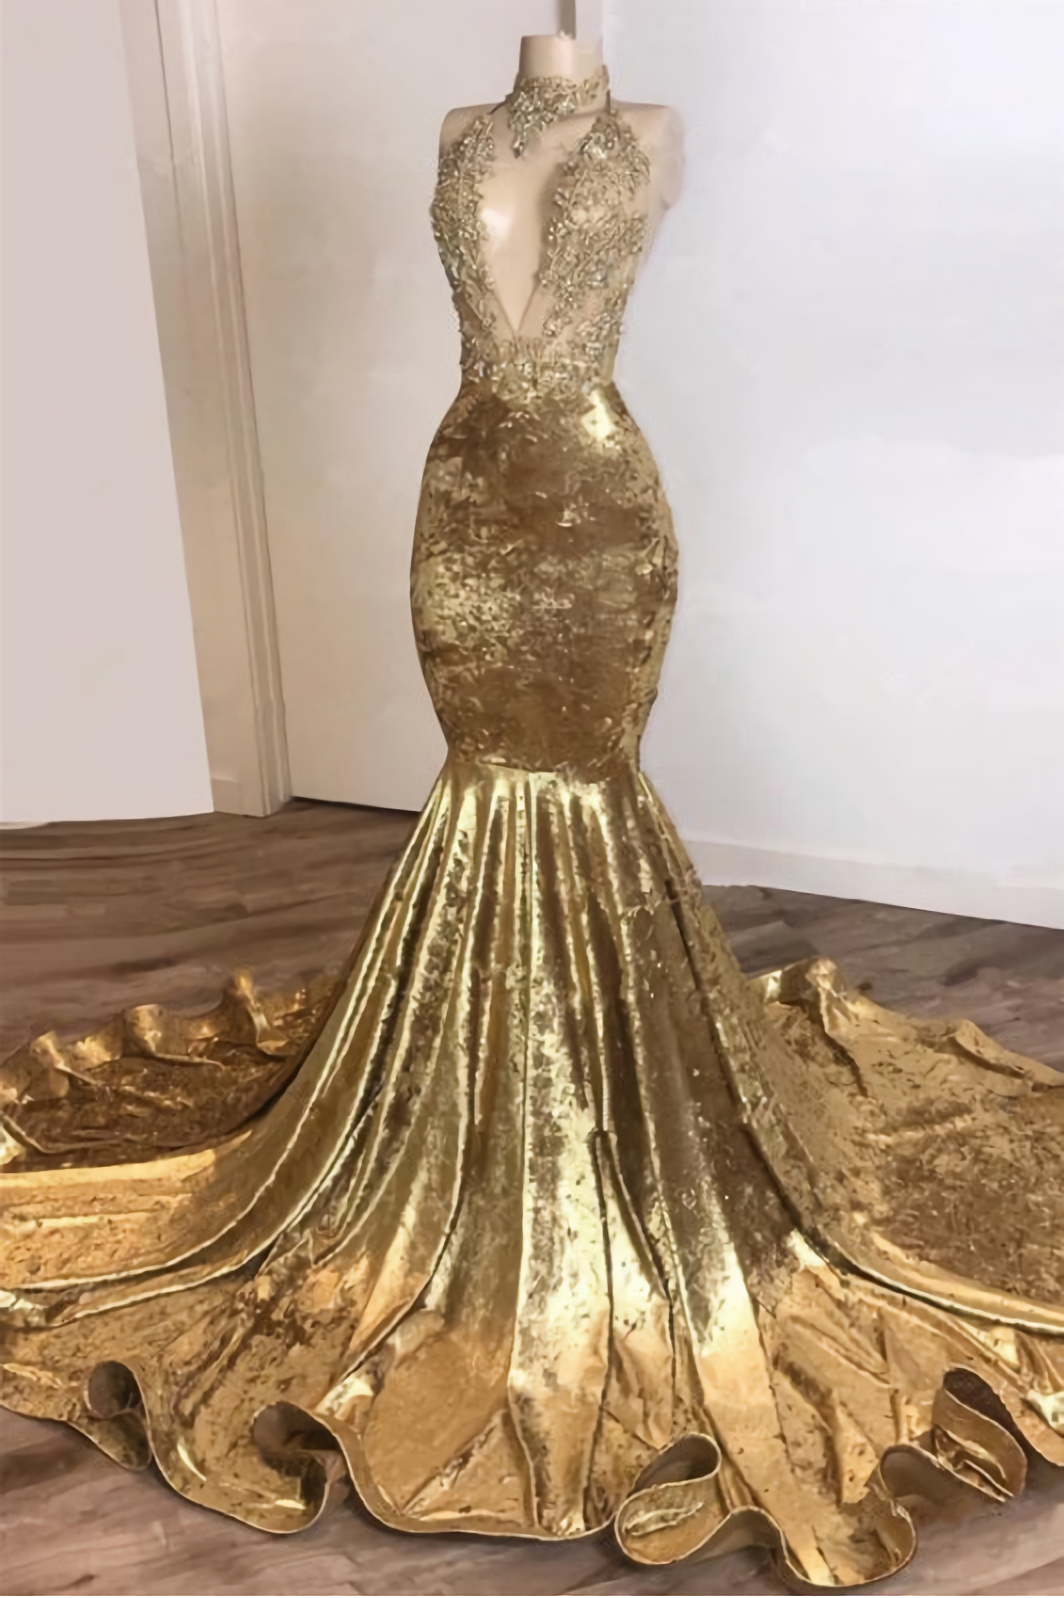 Halter Backless Gold Corset Prom Dresses, With Beads Appliques Mermaid Velvet Sexy Evening Gowns outfit, Formal Dress For Girls